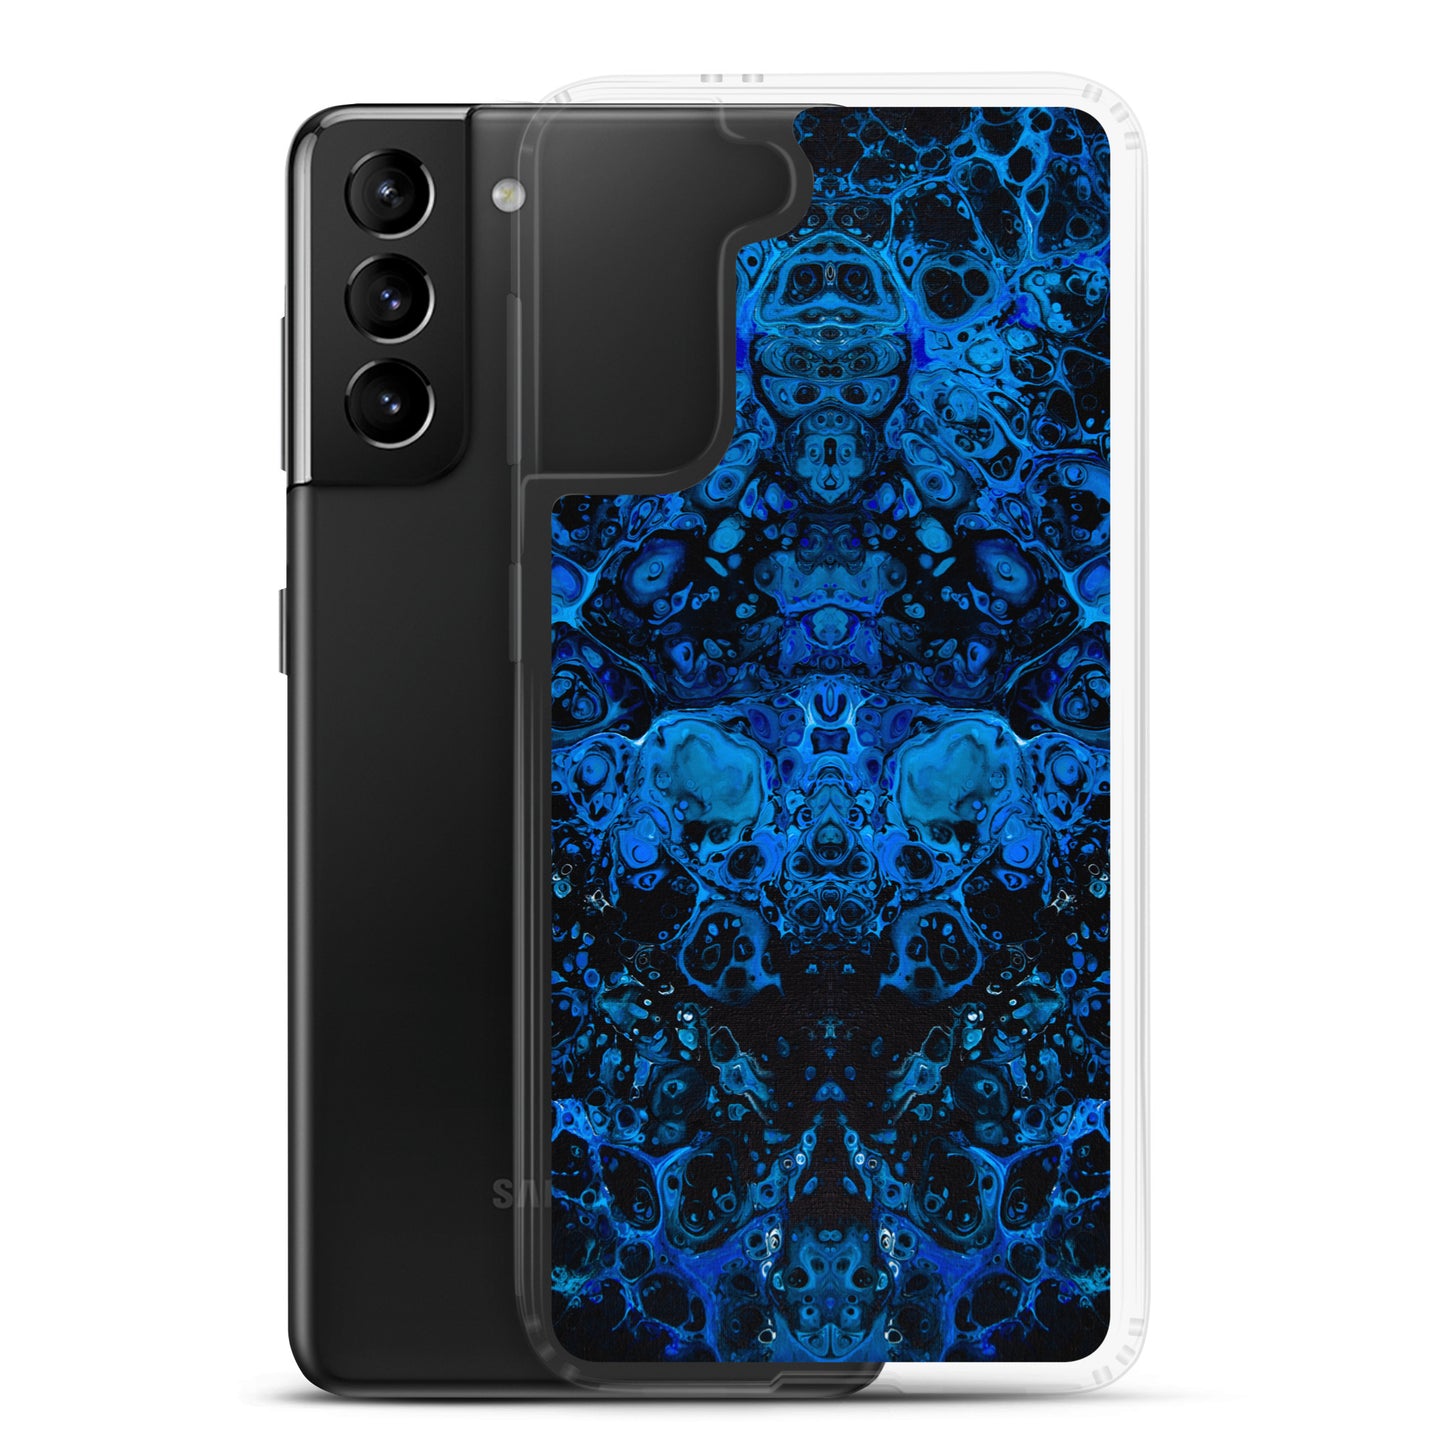 NightOwl Studio Custom Phone Case Compatible with Samsung Galaxy, Slim Cover for Wireless Charging, Drop and Scratch Resistant, Azul